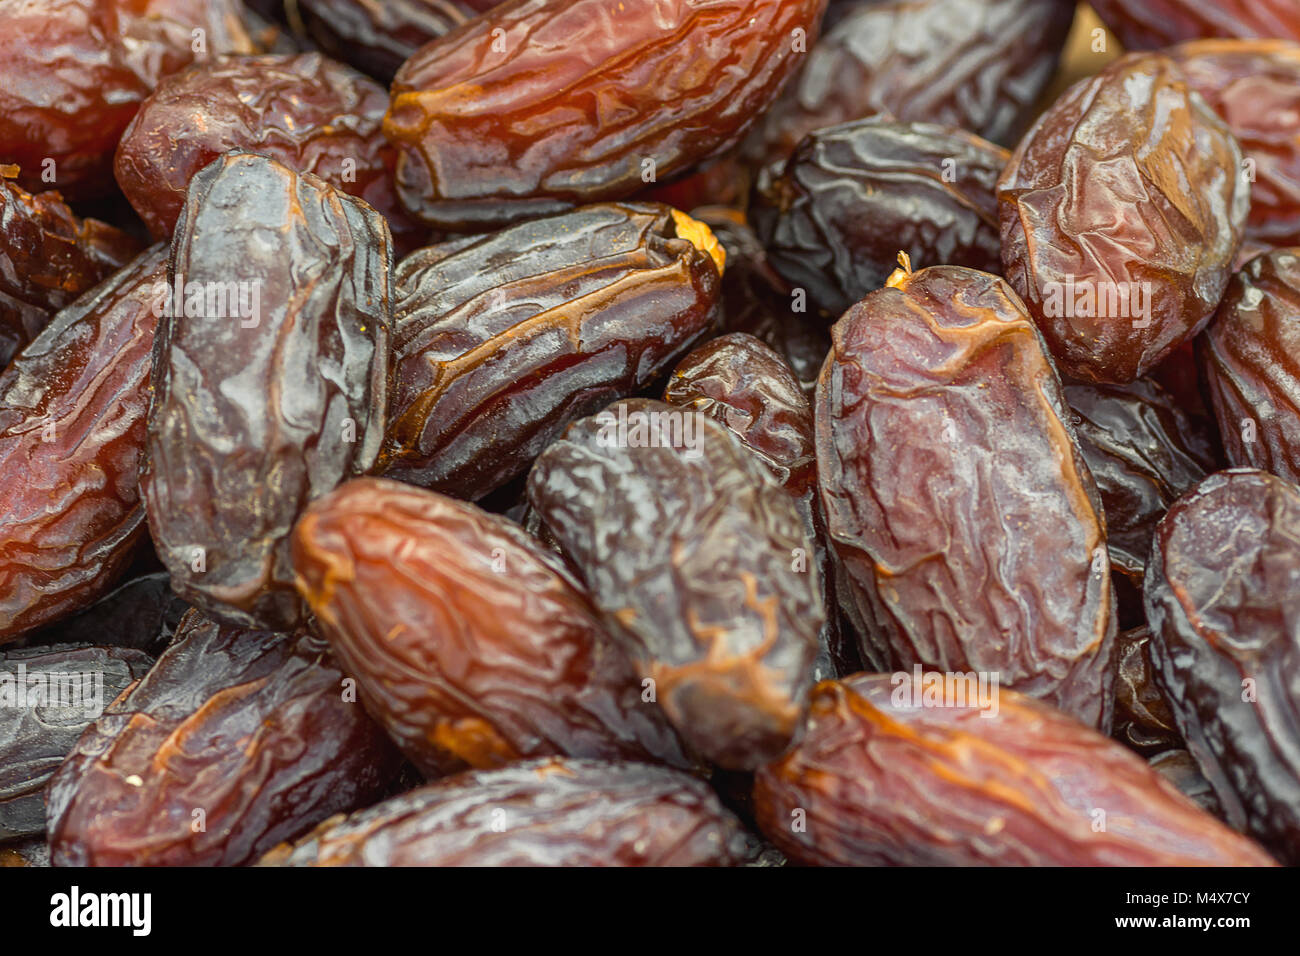 Heap of Ripe Dried Large Brown Dates at Farmers Market. Vibrant Color. Organic Produce Healthy Plant Based Diet Concept. Stock Photo